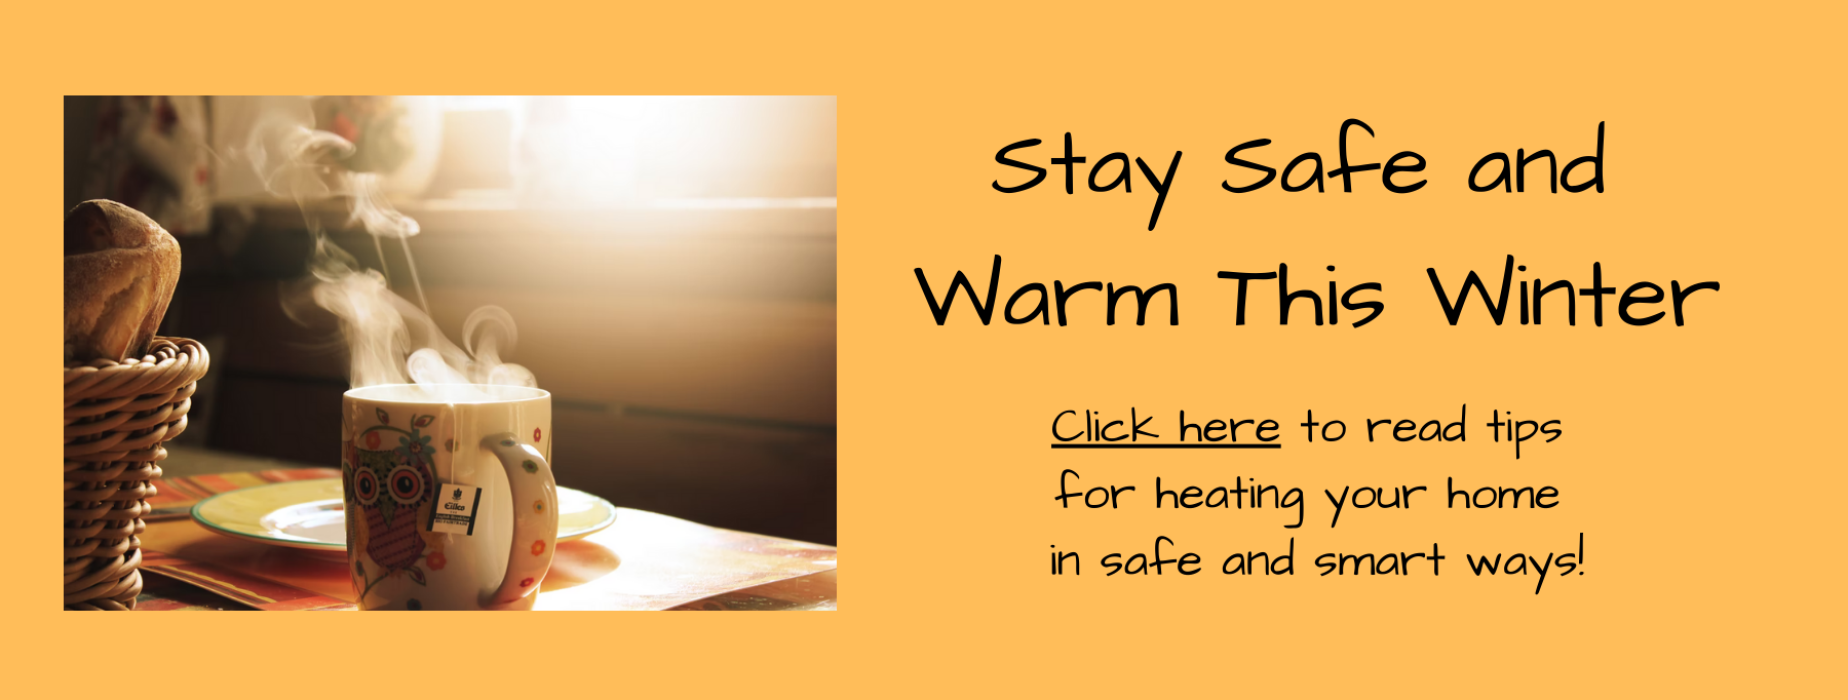 Stay safe and warm this winter